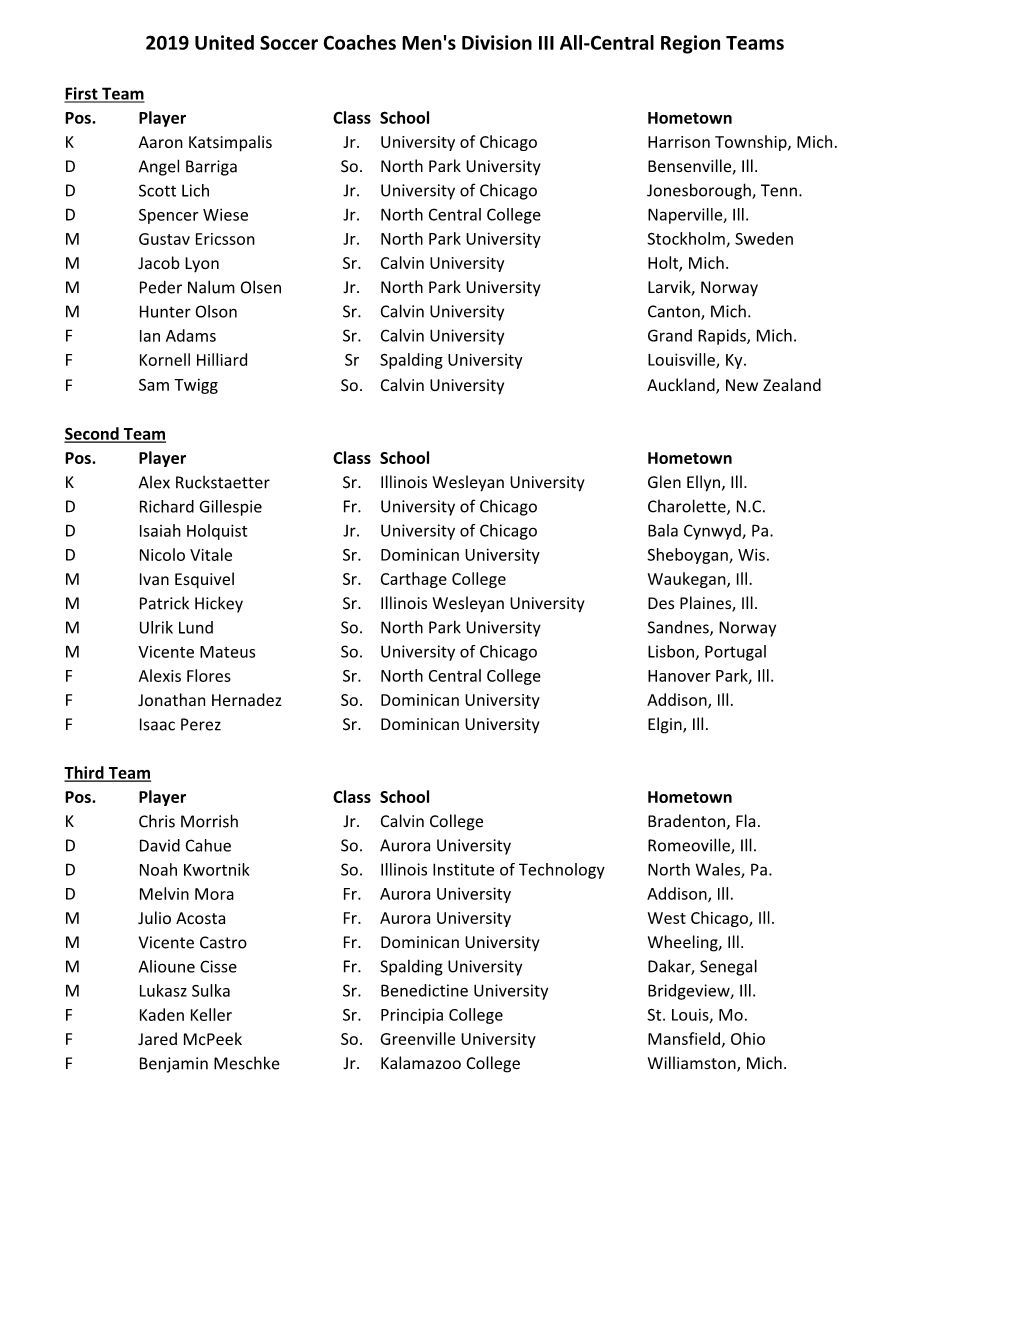 2019 United Soccer Coaches Men's Division III All-Central Region Teams